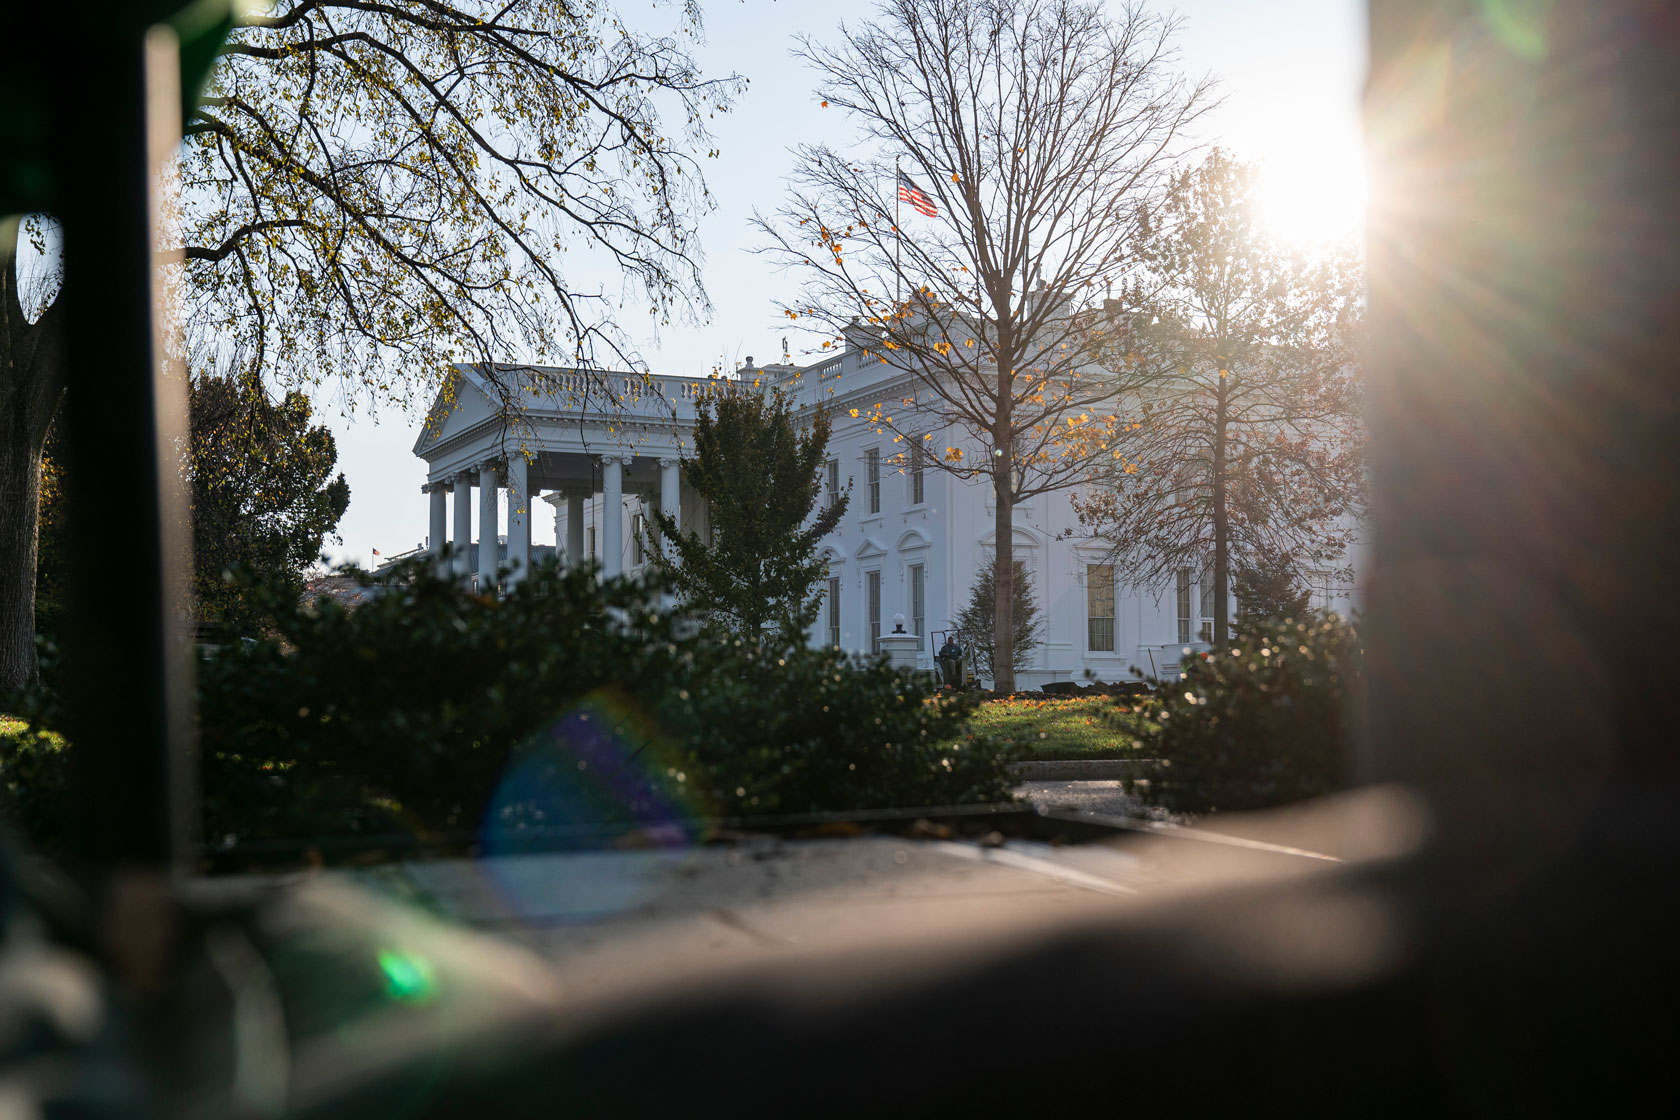 The sun is rising behind the White House.